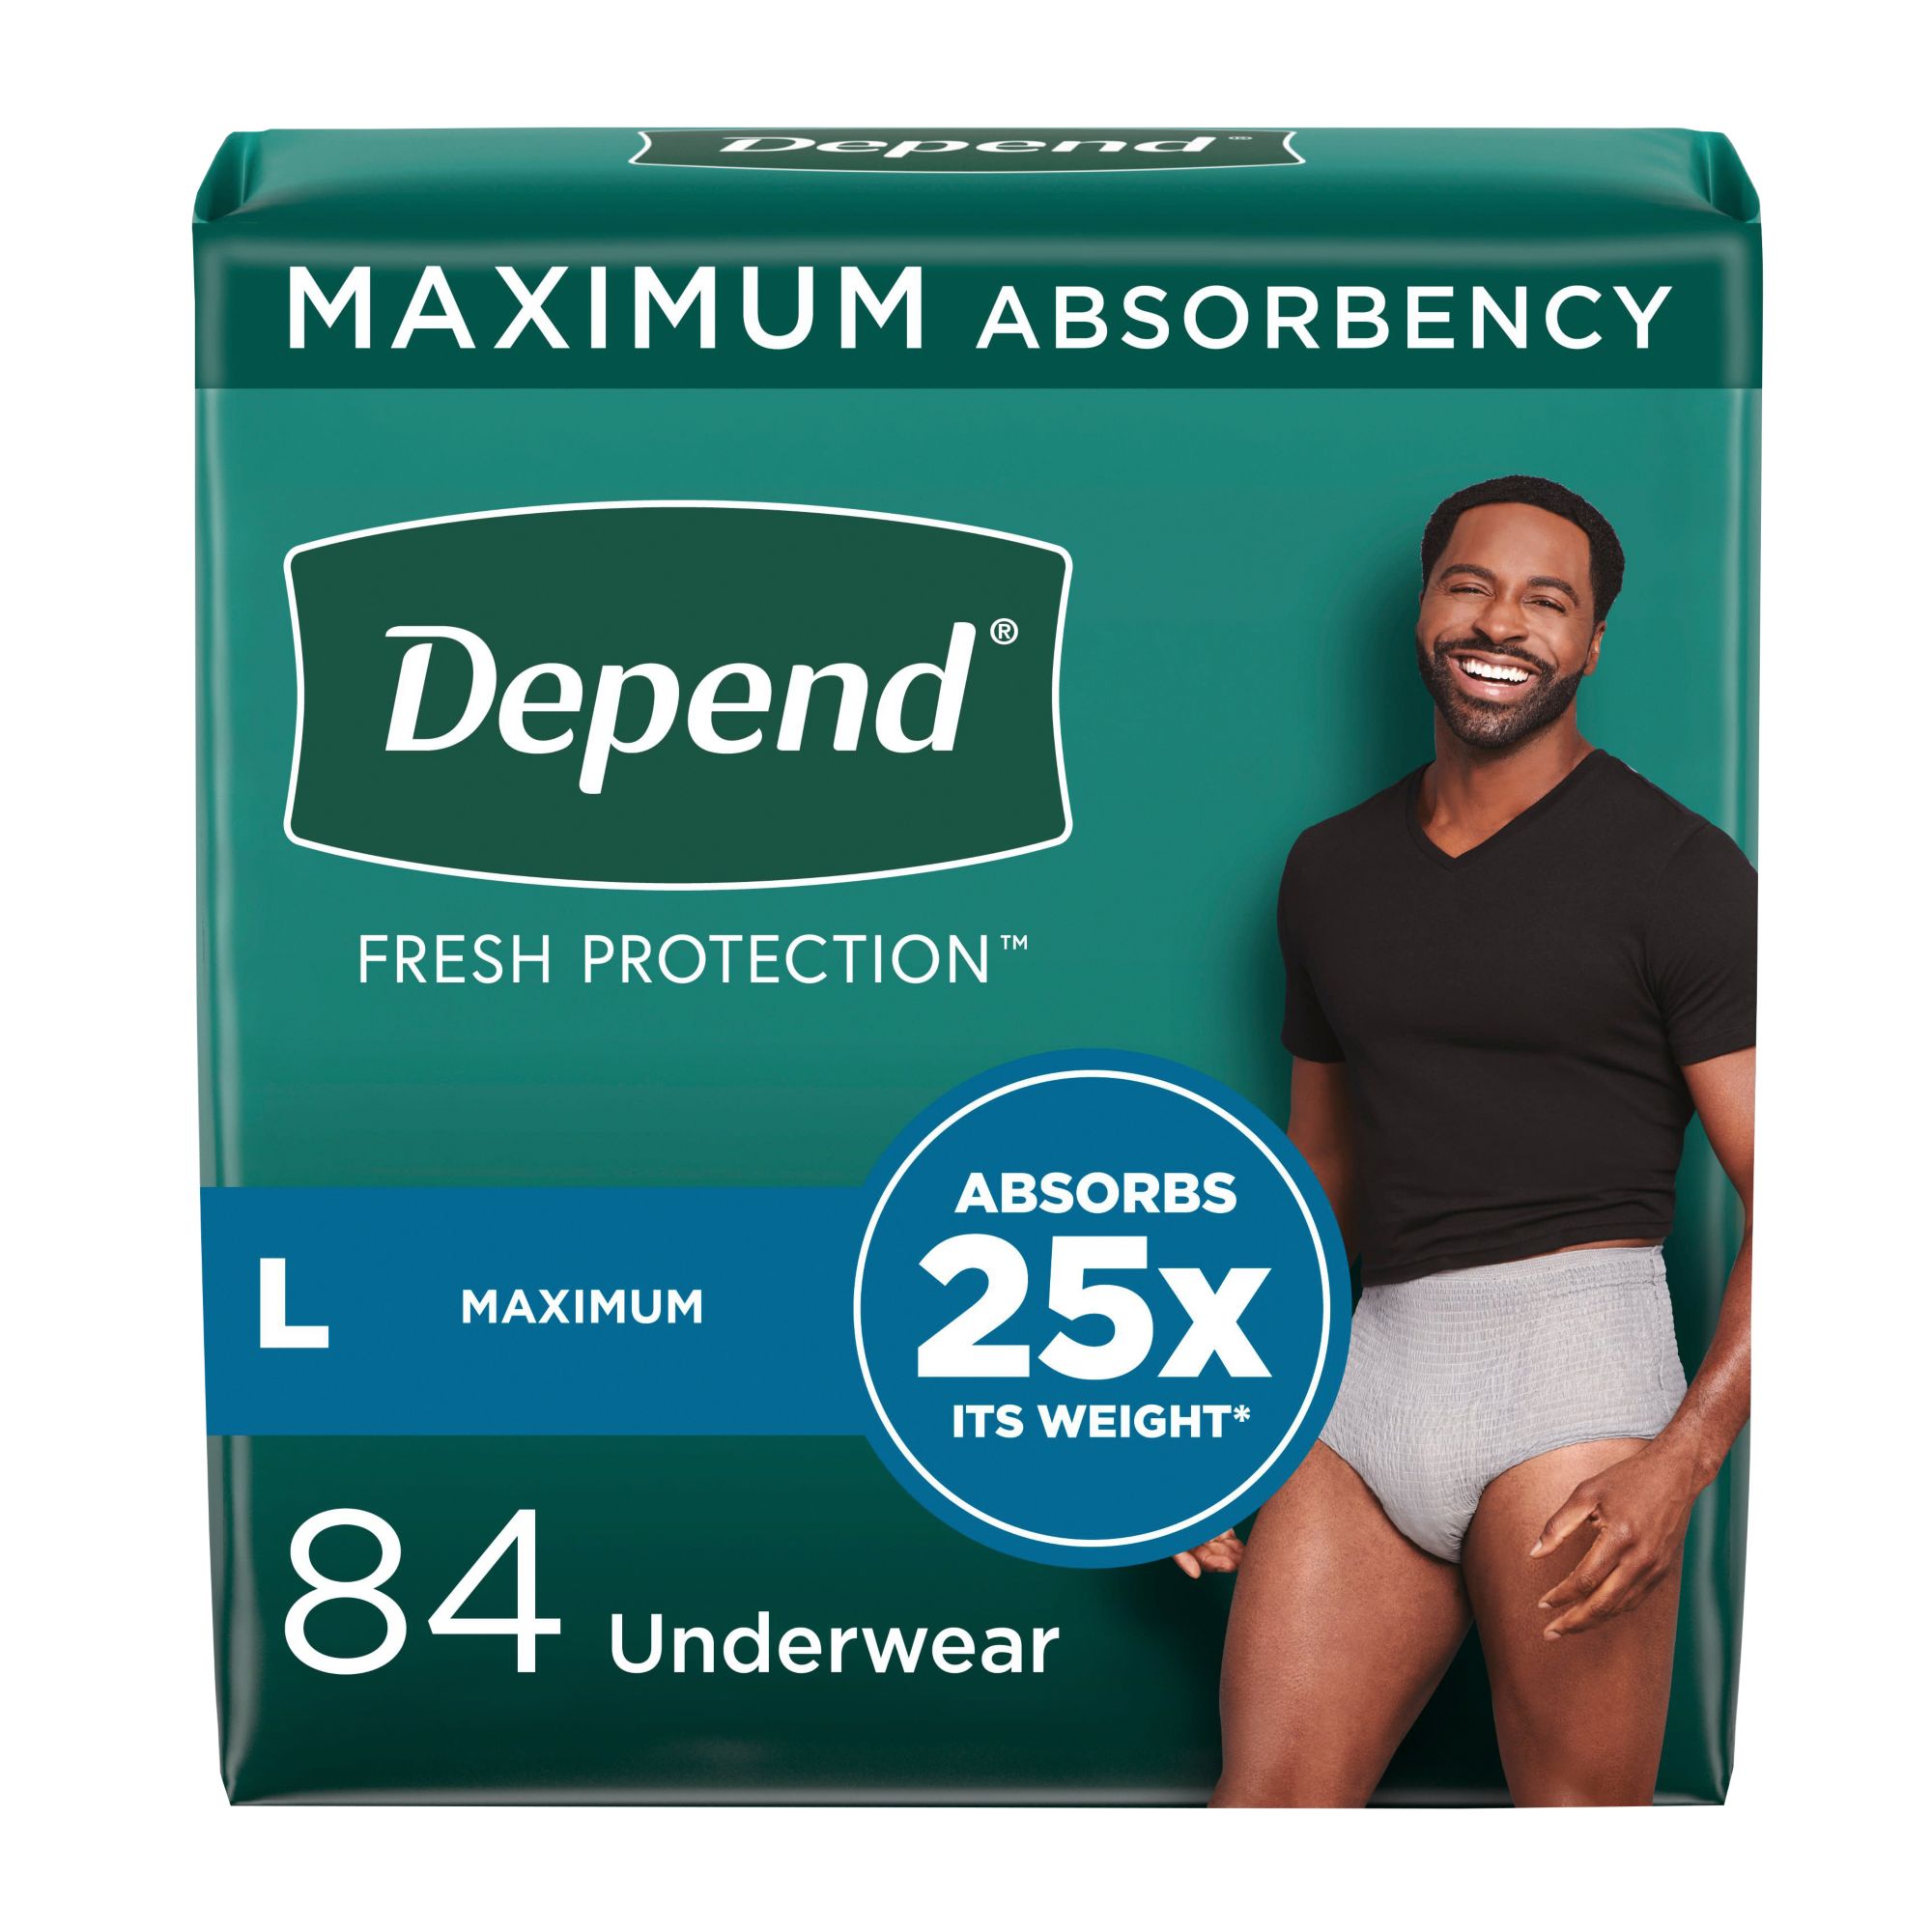 Depend Fresh Protection Adult Incontinence Underwear for Men, Large - Grey, 84 ct.